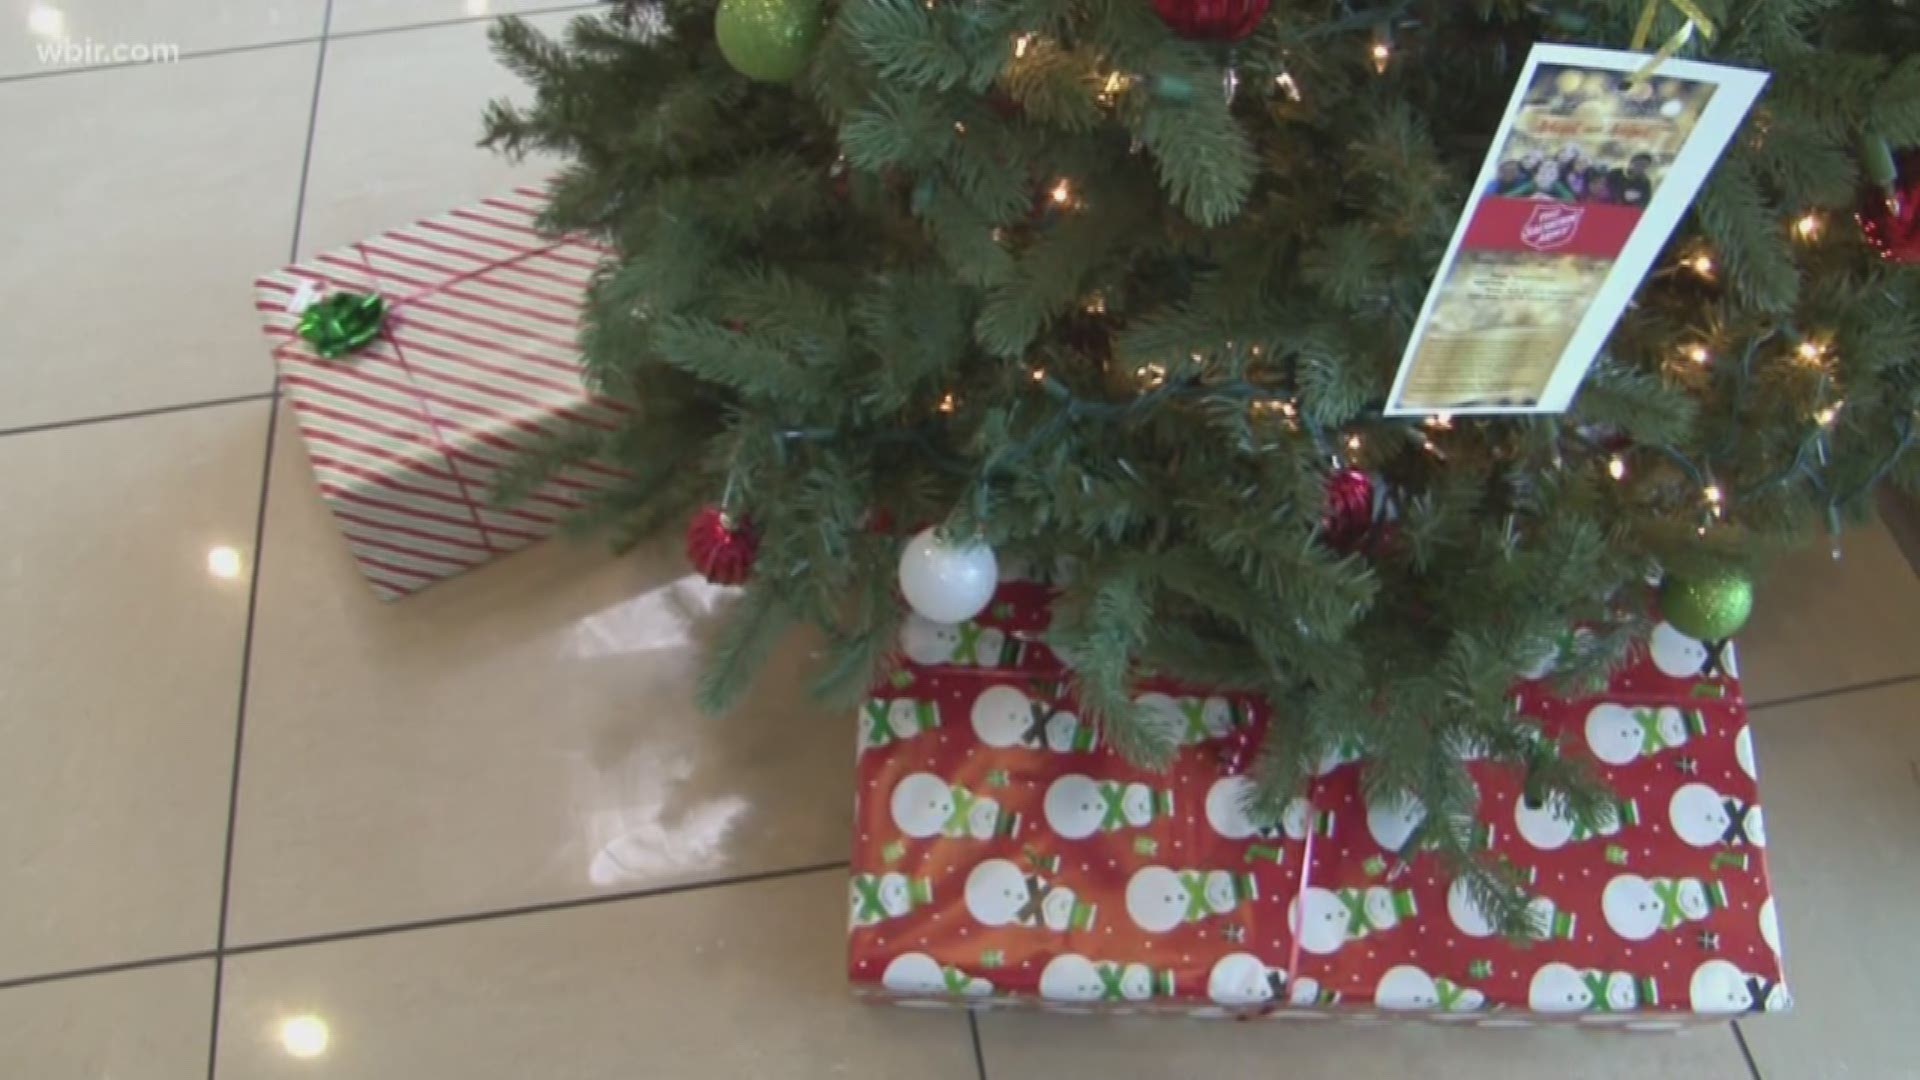 The Salvation Army said there were more Angel Tree applications this year than in the past.